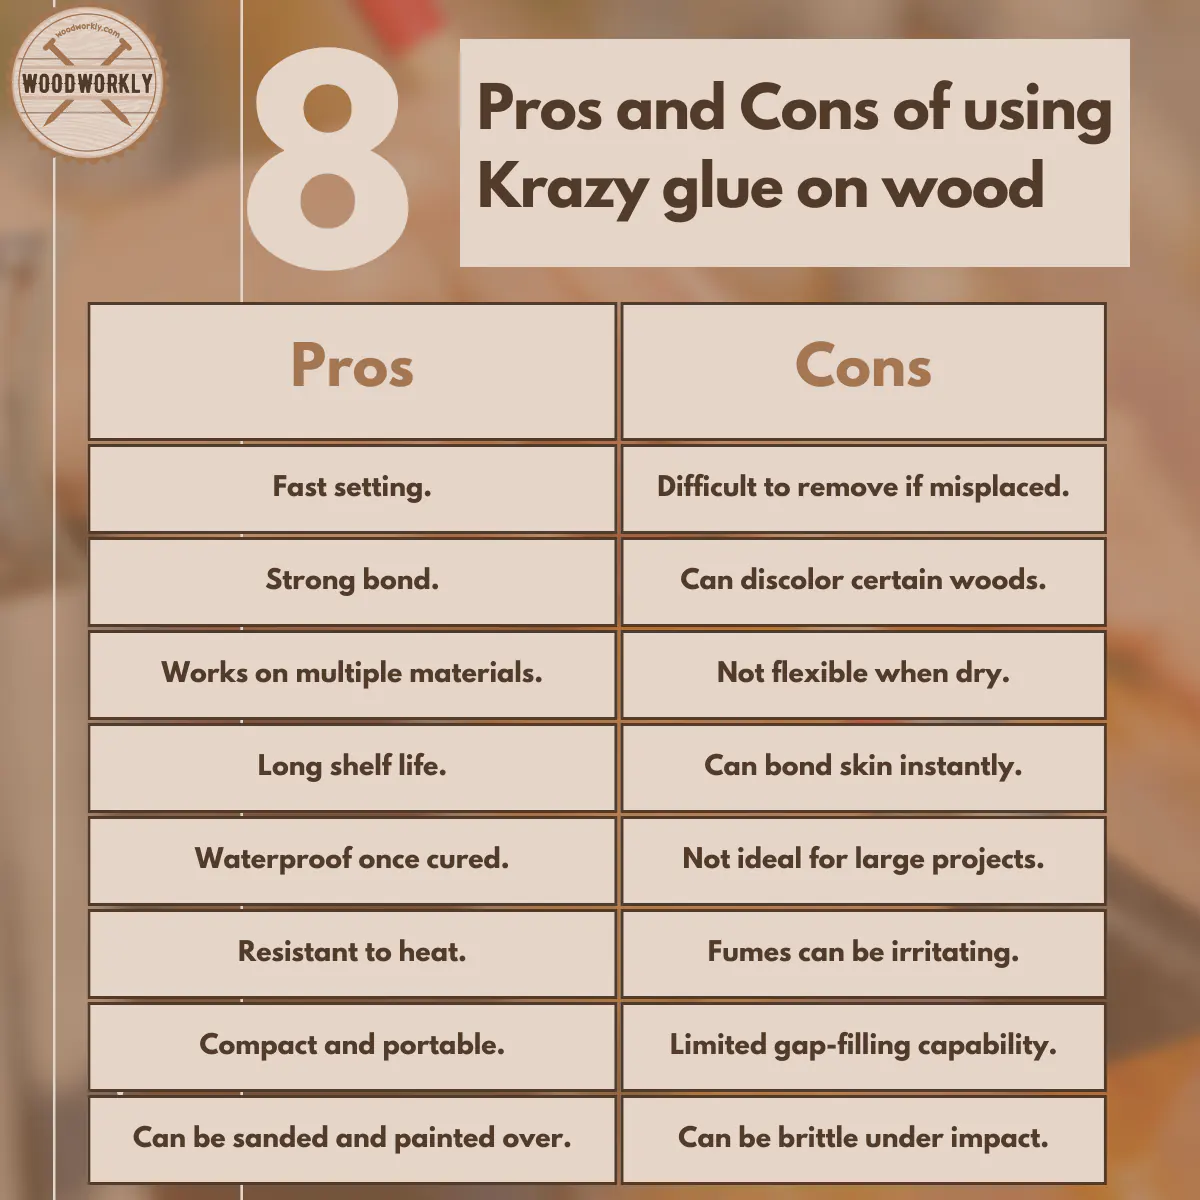 Pros and Cons of using Krazy glue on wood